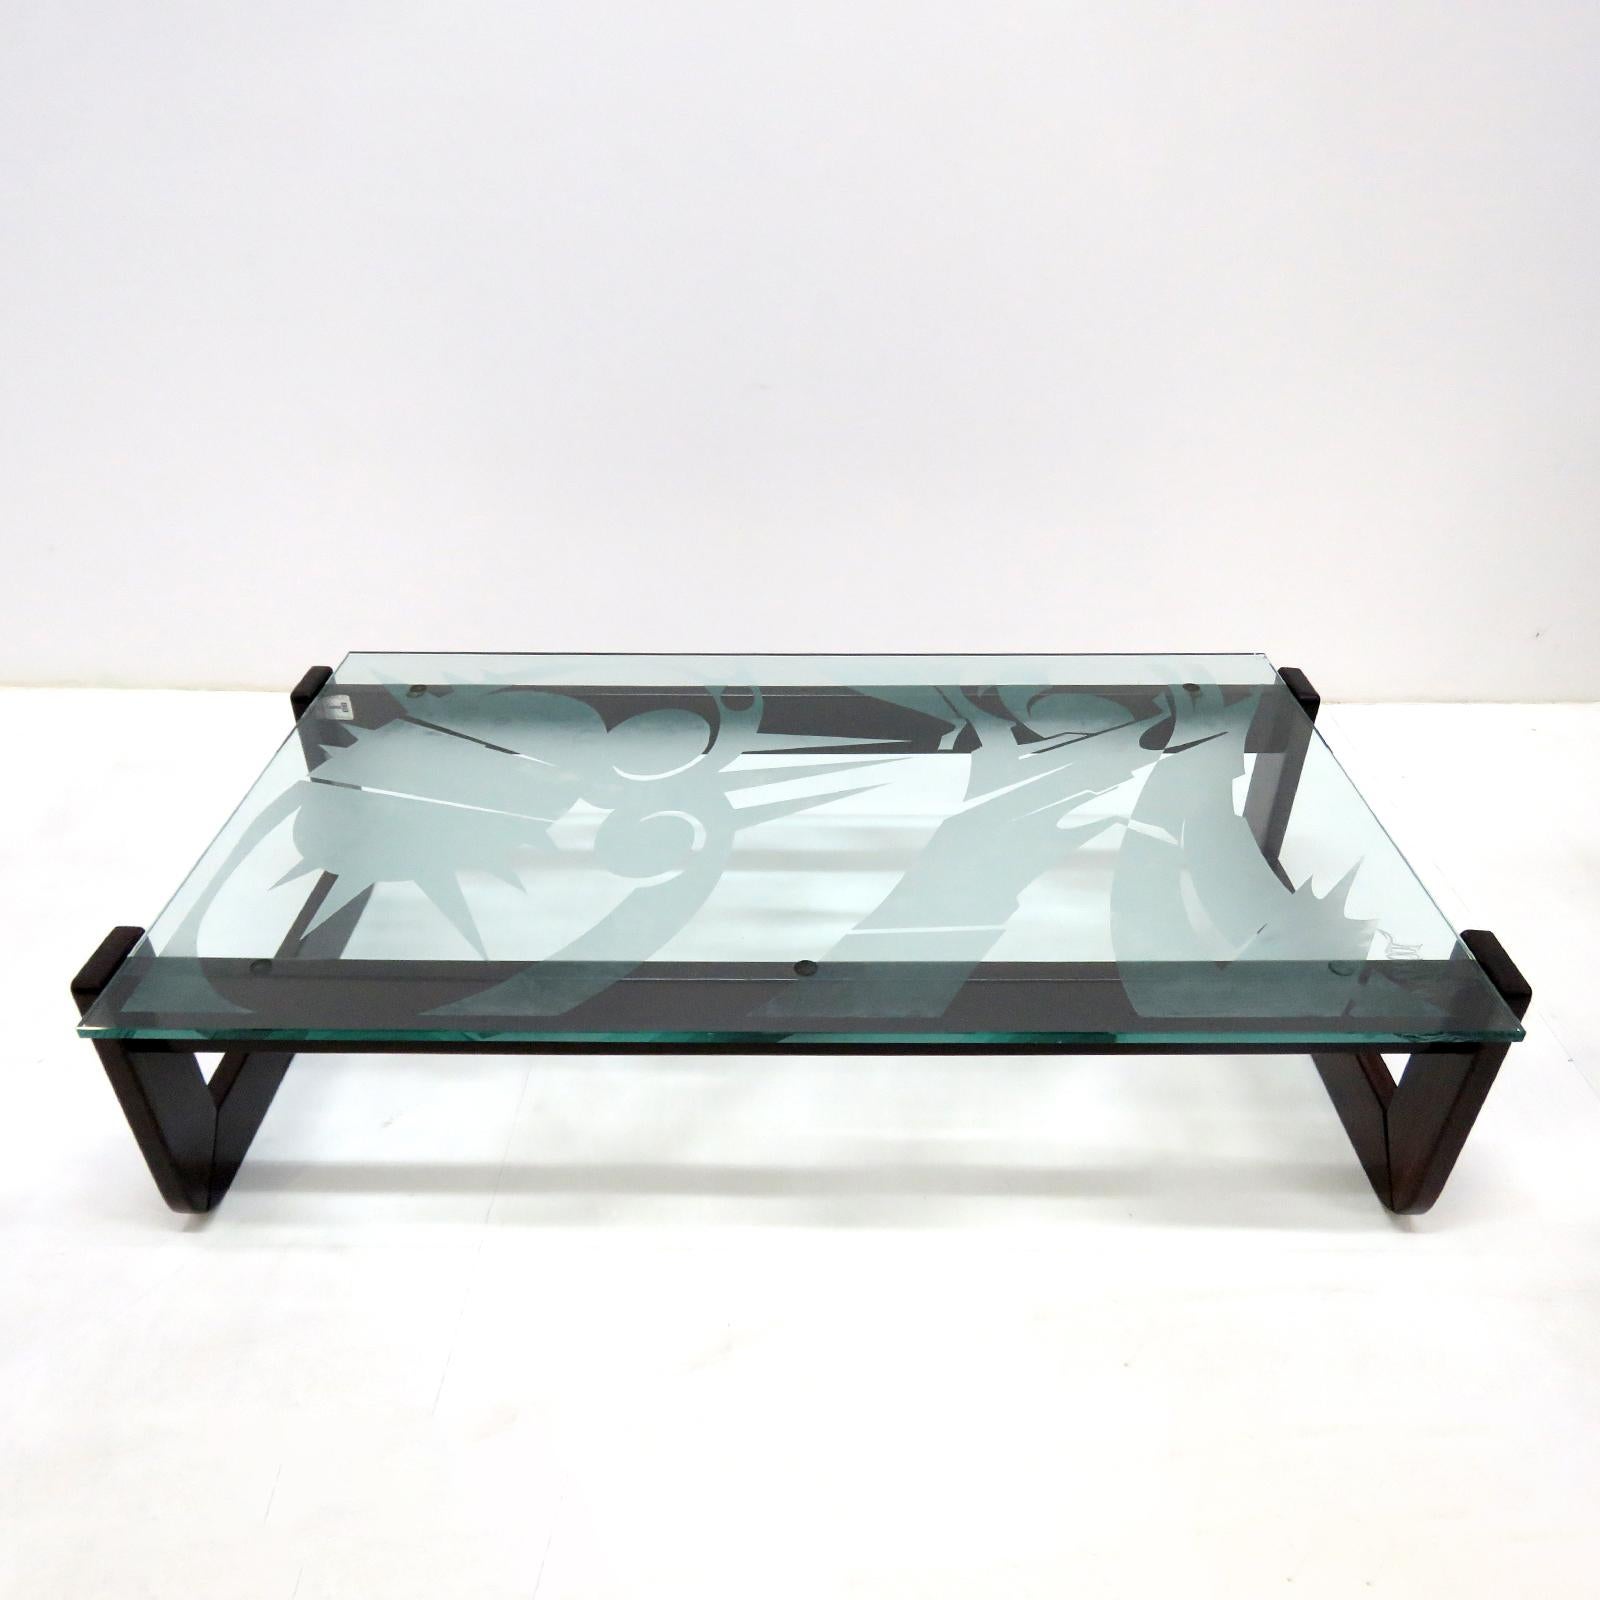 beautiful, well made coffee table by Maurice Percival for Lafer, in dark brazilian rosewood marked with the Lafer label, shown with custom artist etched glass top, clear glass top available upon request.